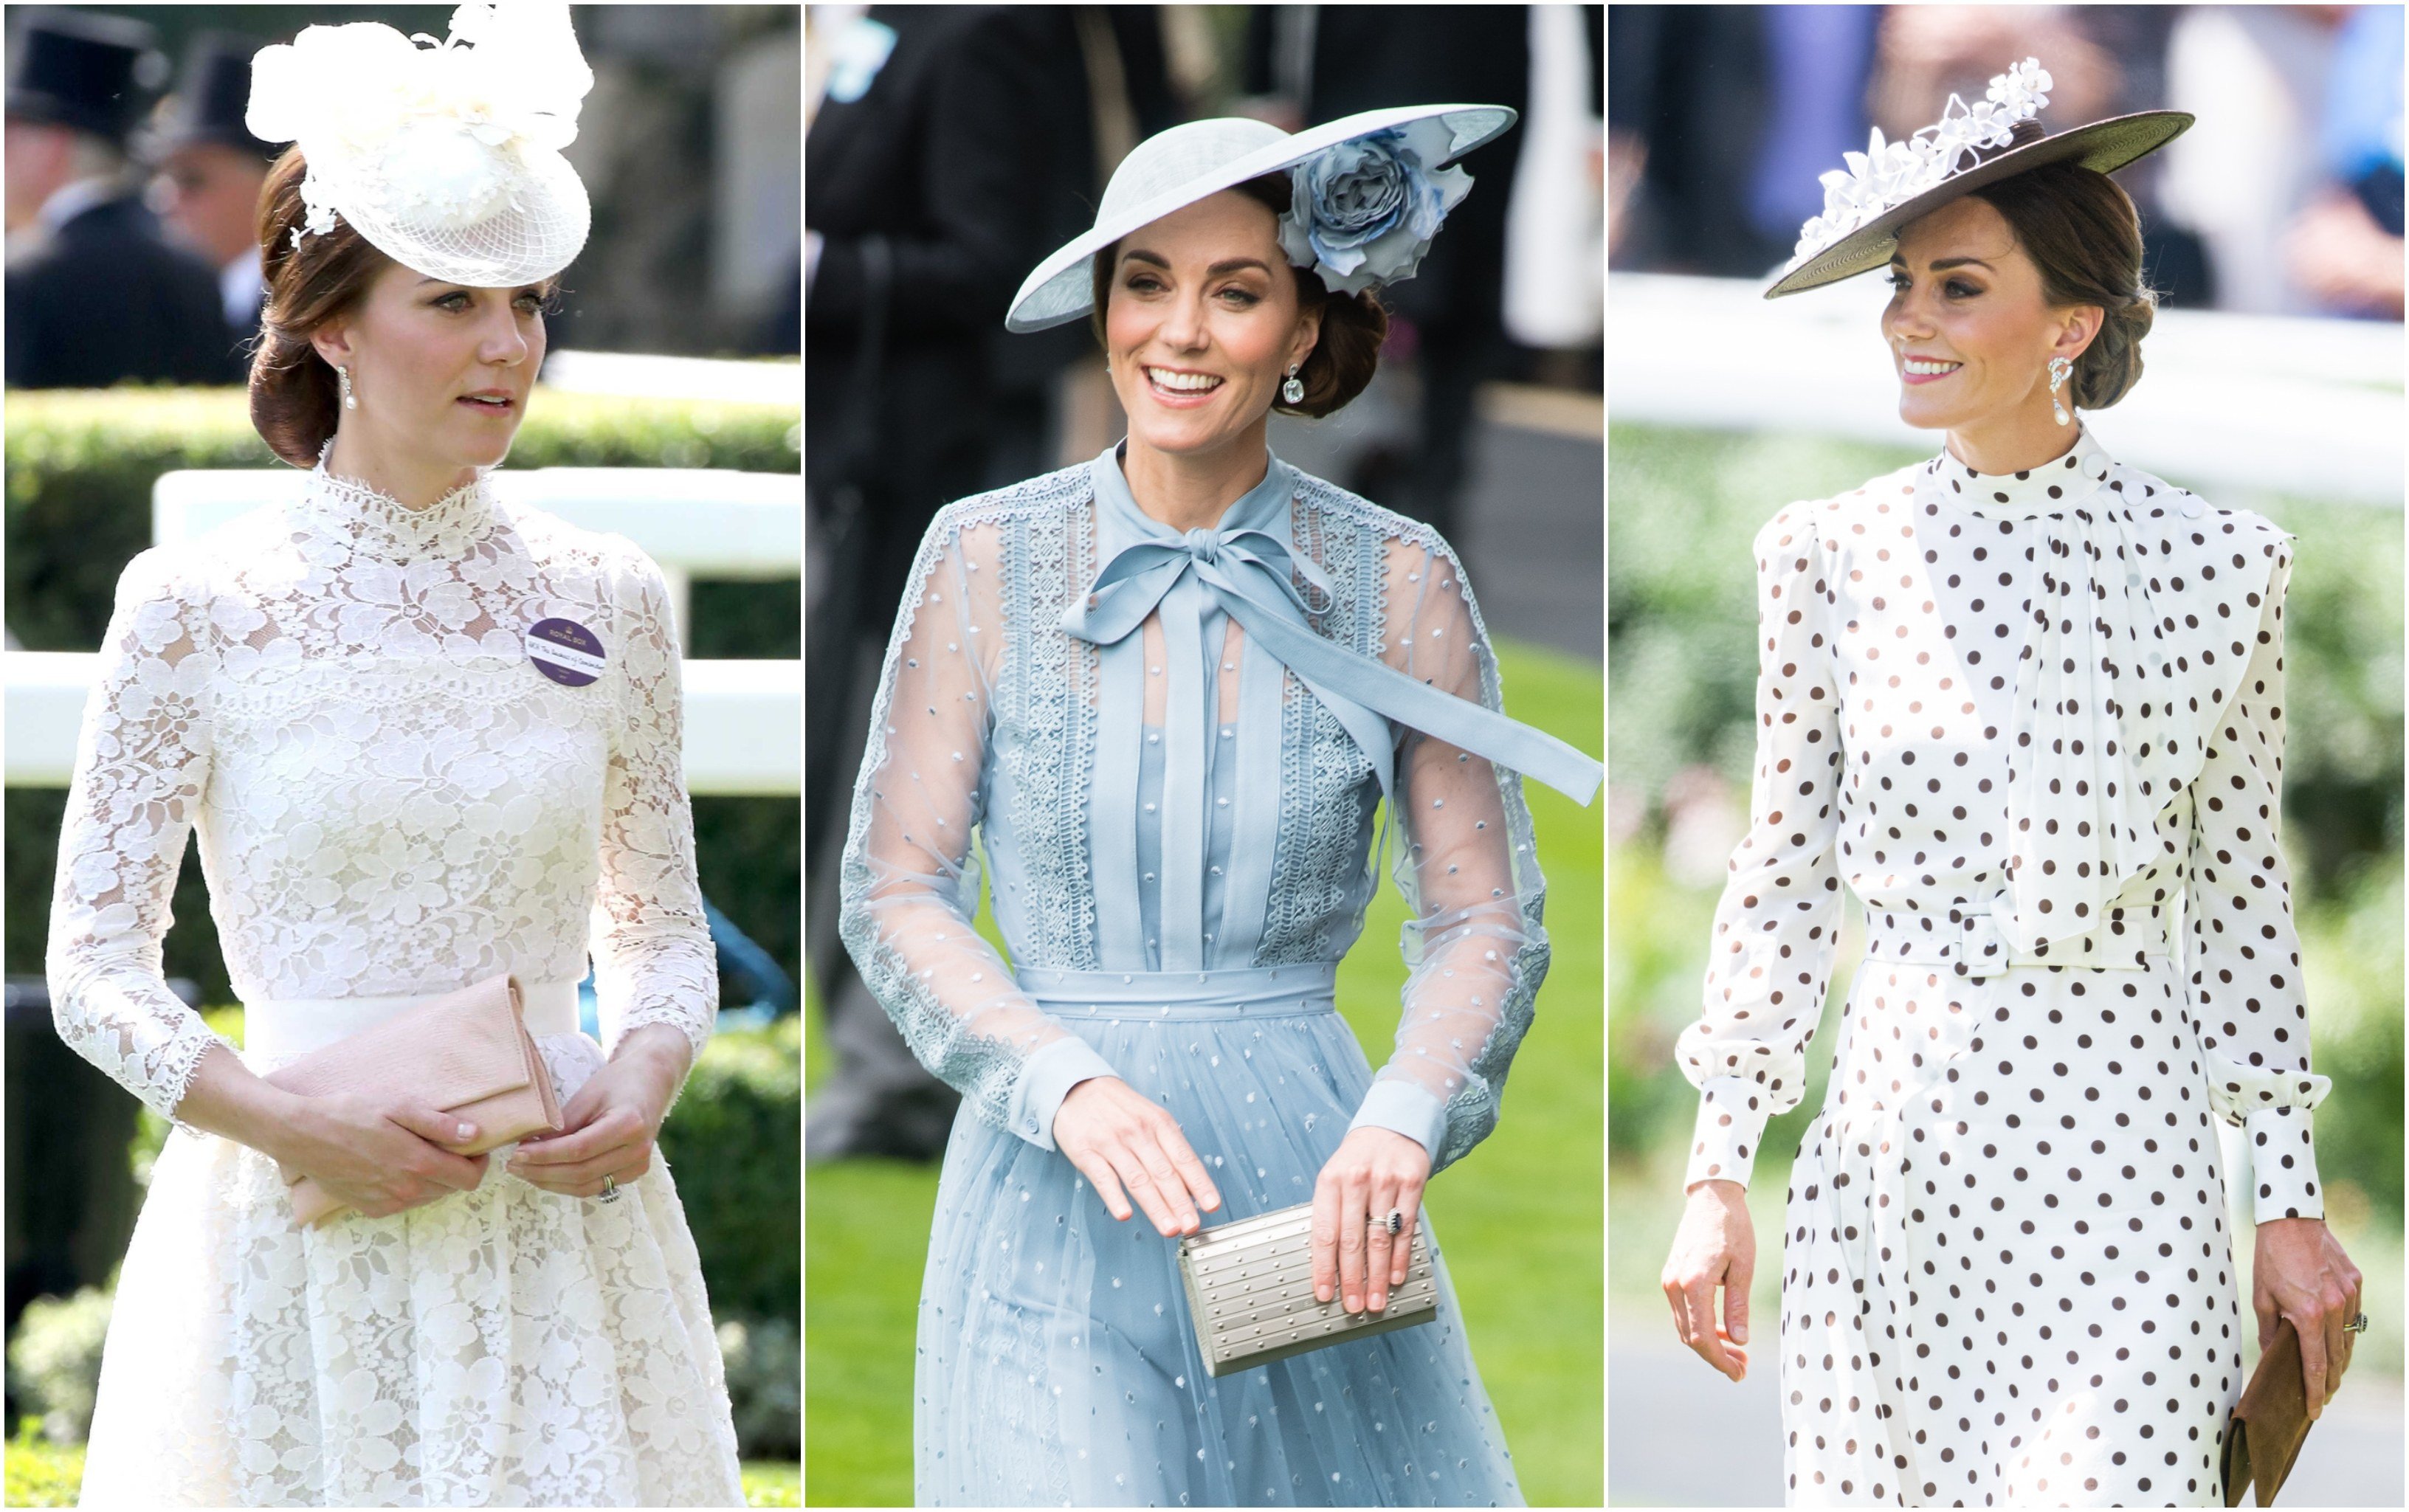 Kate Middleton's Polka Dot Dress Was Also Worn By Ivanka Trump and a Royal  Wedding Guest